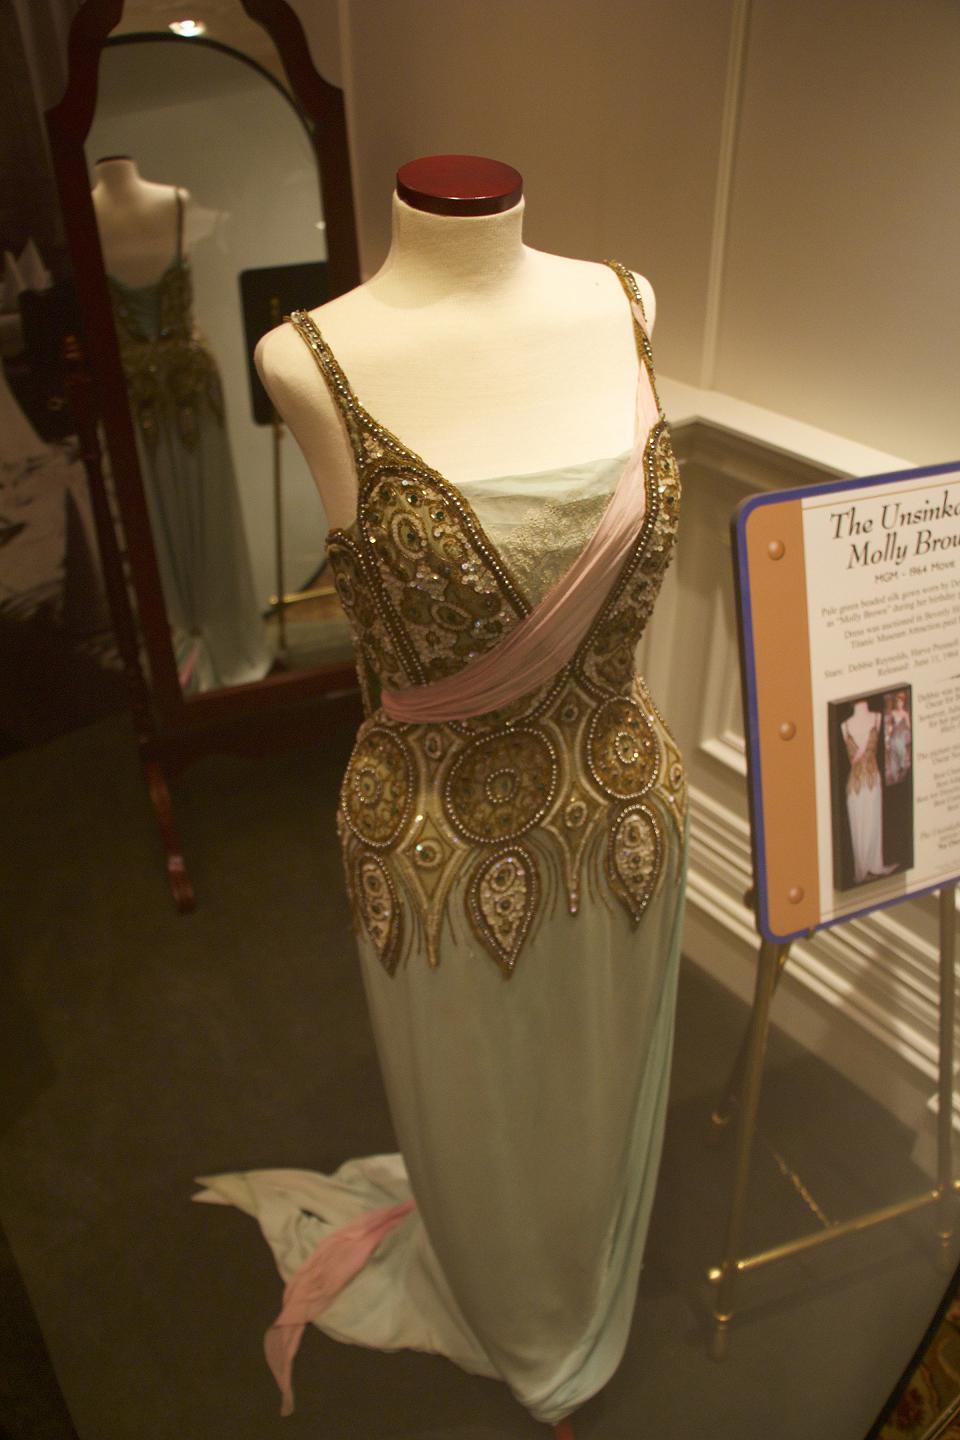 Molly Brown movie evening dress